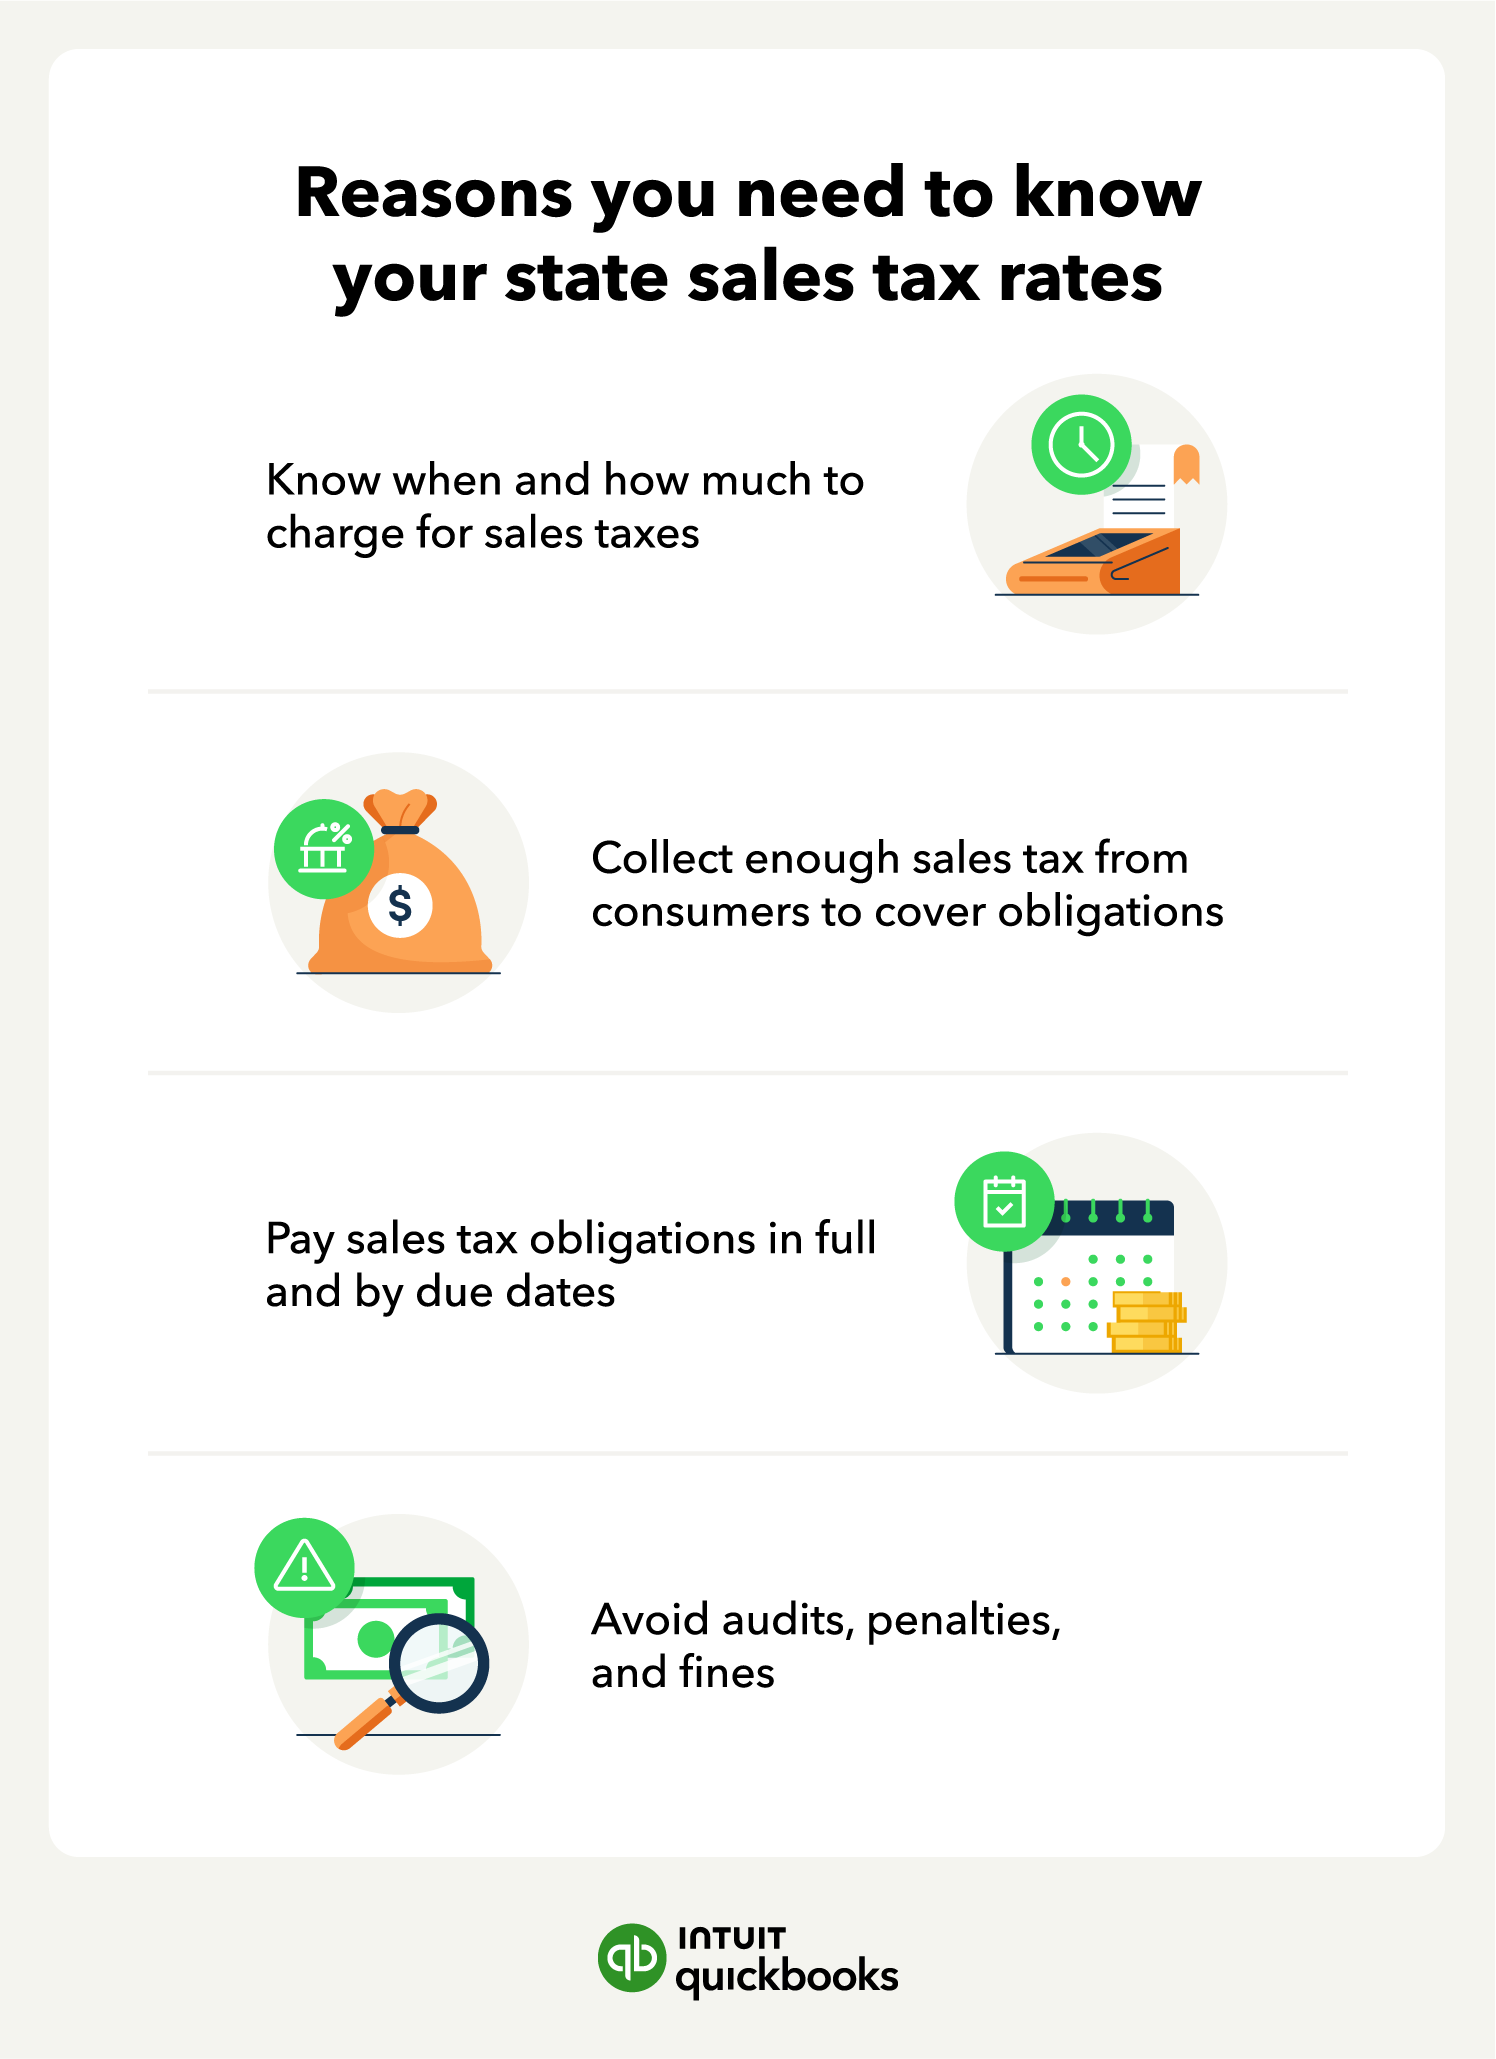 An illustration of the reasons you need to know your state sales tax rates, such as avoiding audits and fines.